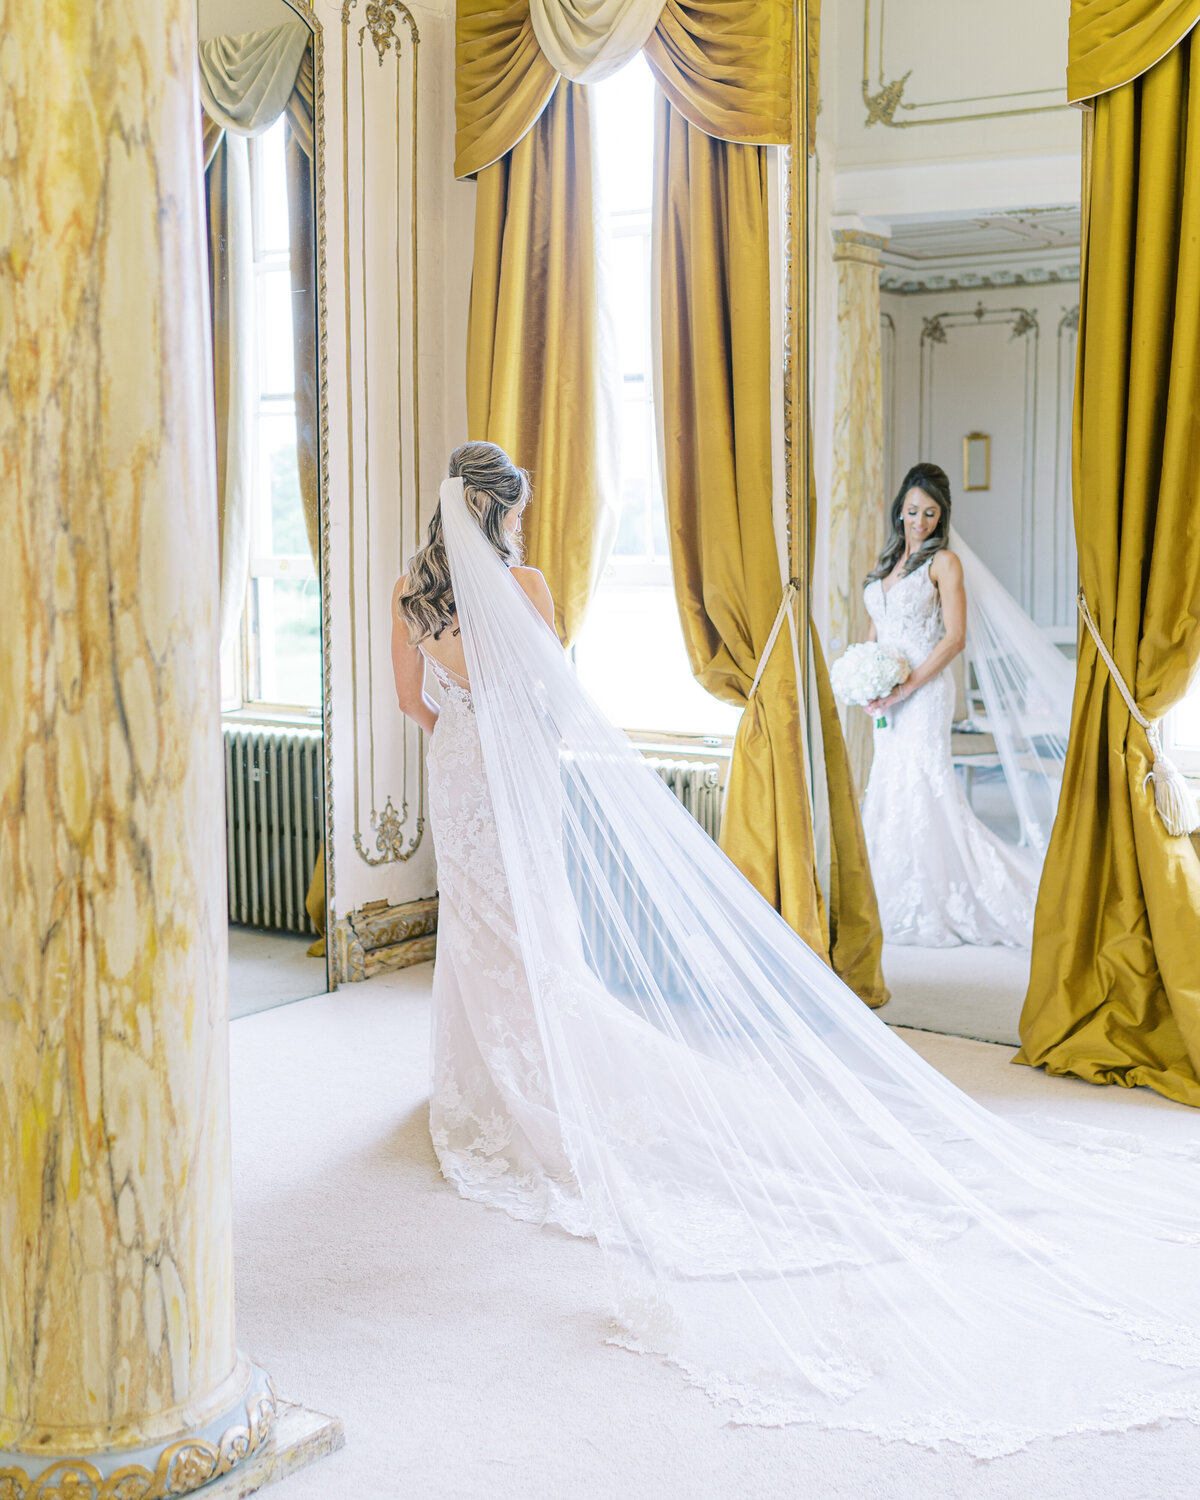 Bridal portrait in stunning bridal suite at Gosfield Hall